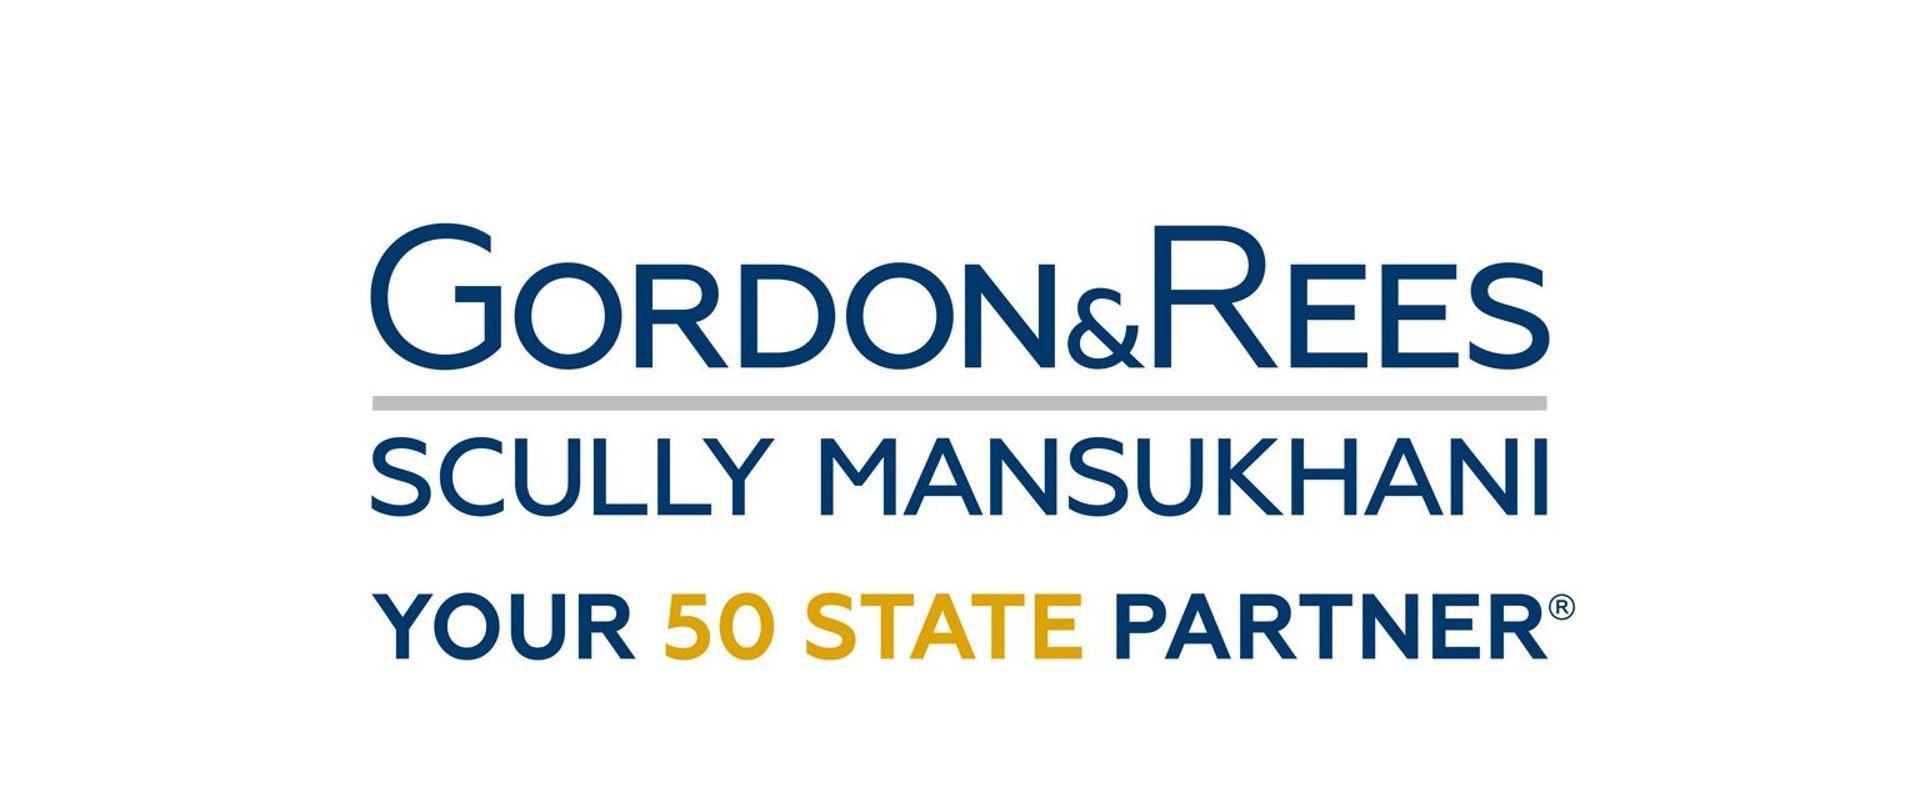 Gordon Rees Scully Mansukhani, LLP. cover photo